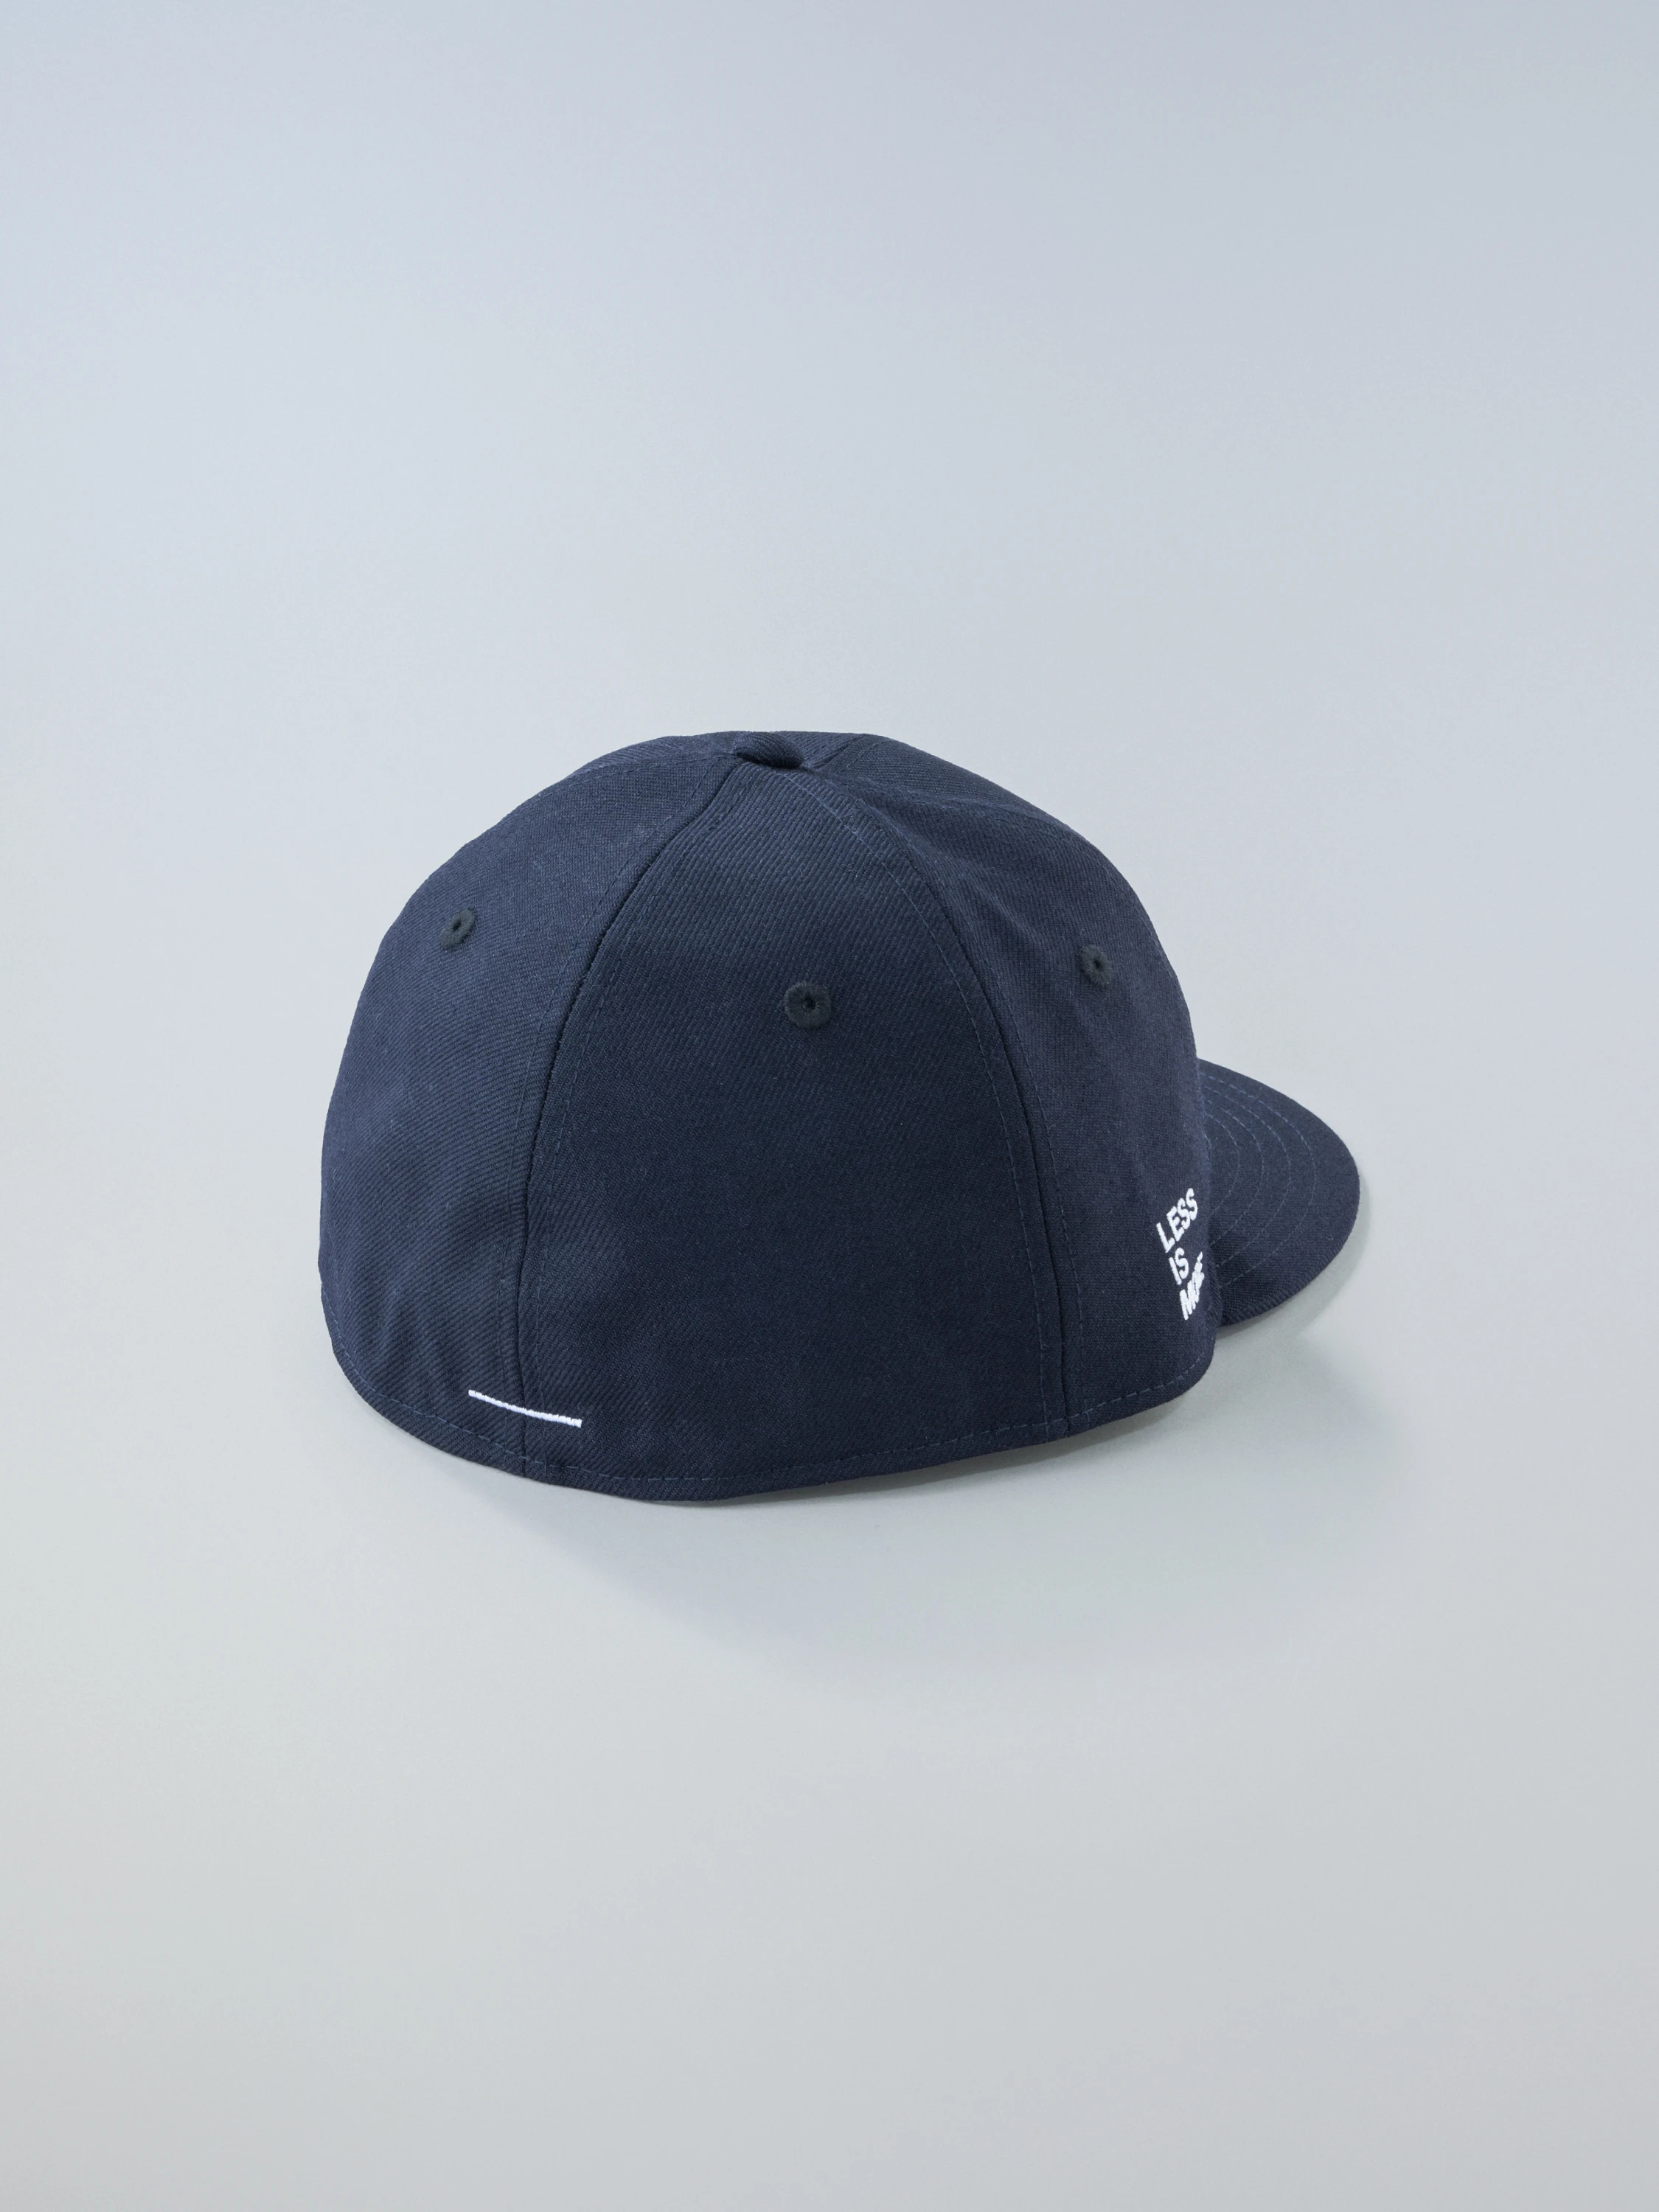 59FIFTY Classic BB Cap | OTHERS | KAPTAIN SUNSHINE ONLINE STORE